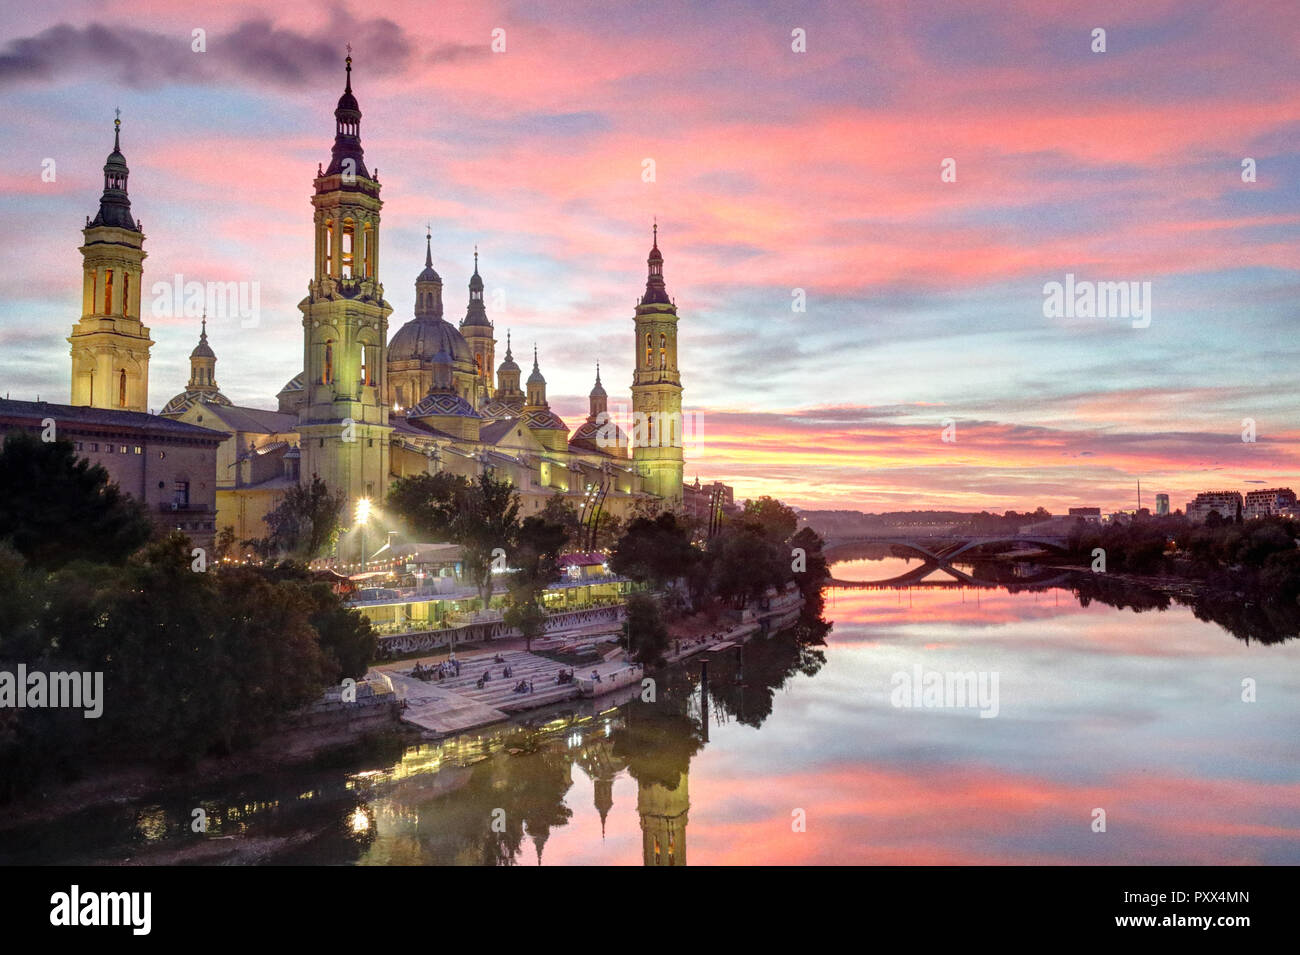 A landscape of Pilar Cathedral and Santiago Bridge reflecting in the Ebro river at sunset, after a storm, in a cloudy autumn, in Zaragoza, Spain Stock Photo